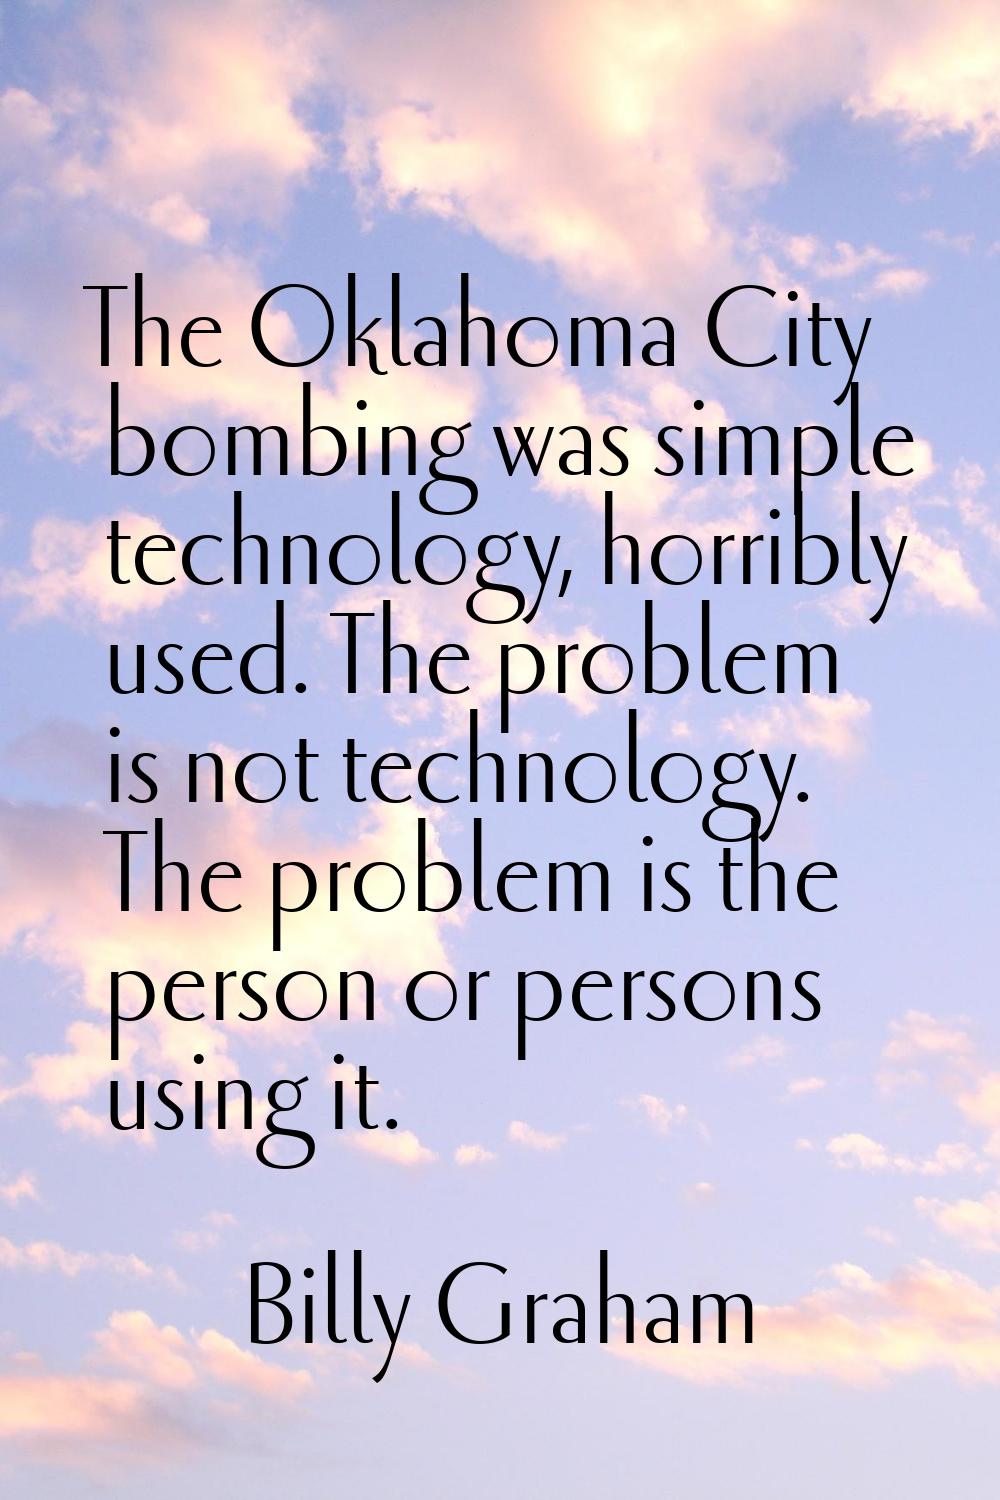 The Oklahoma City bombing was simple technology, horribly used. The problem is not technology. The 